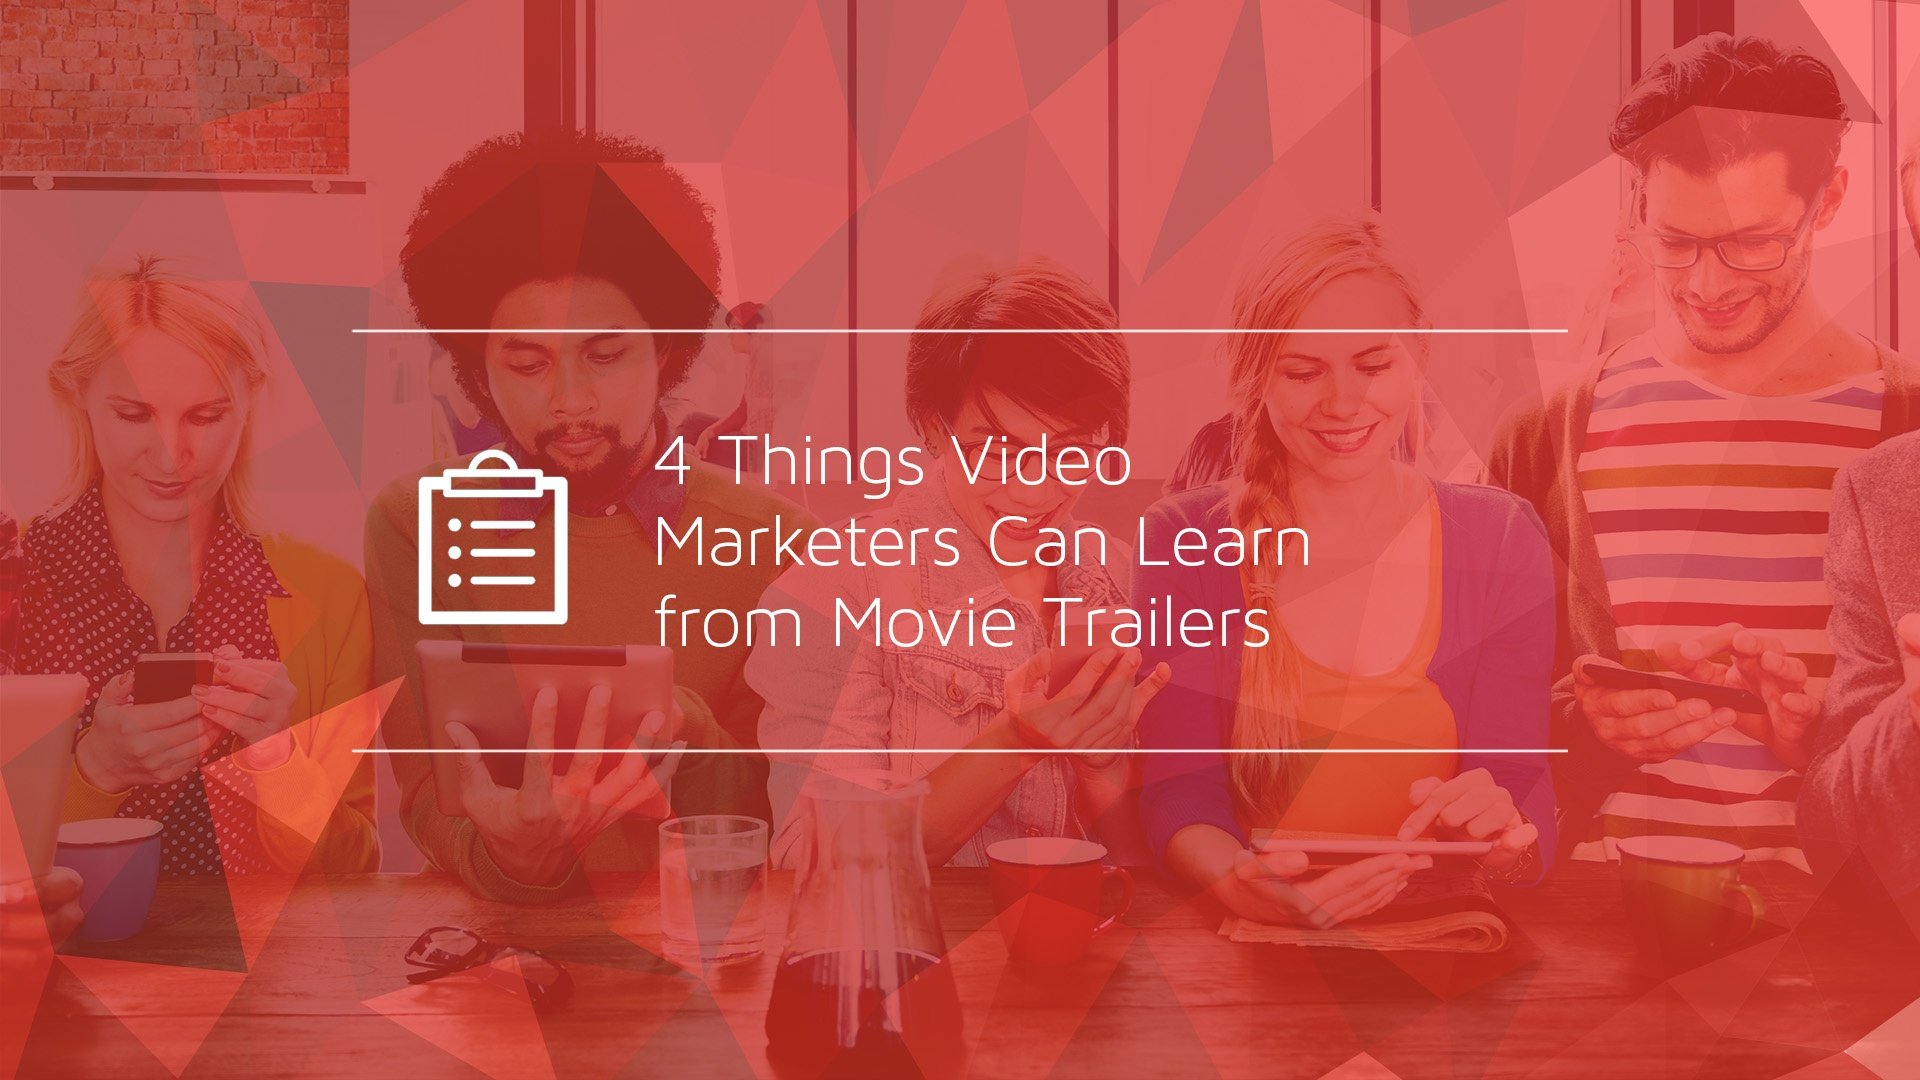 4 Things Video Marketers Can Learn from Movie Trailers